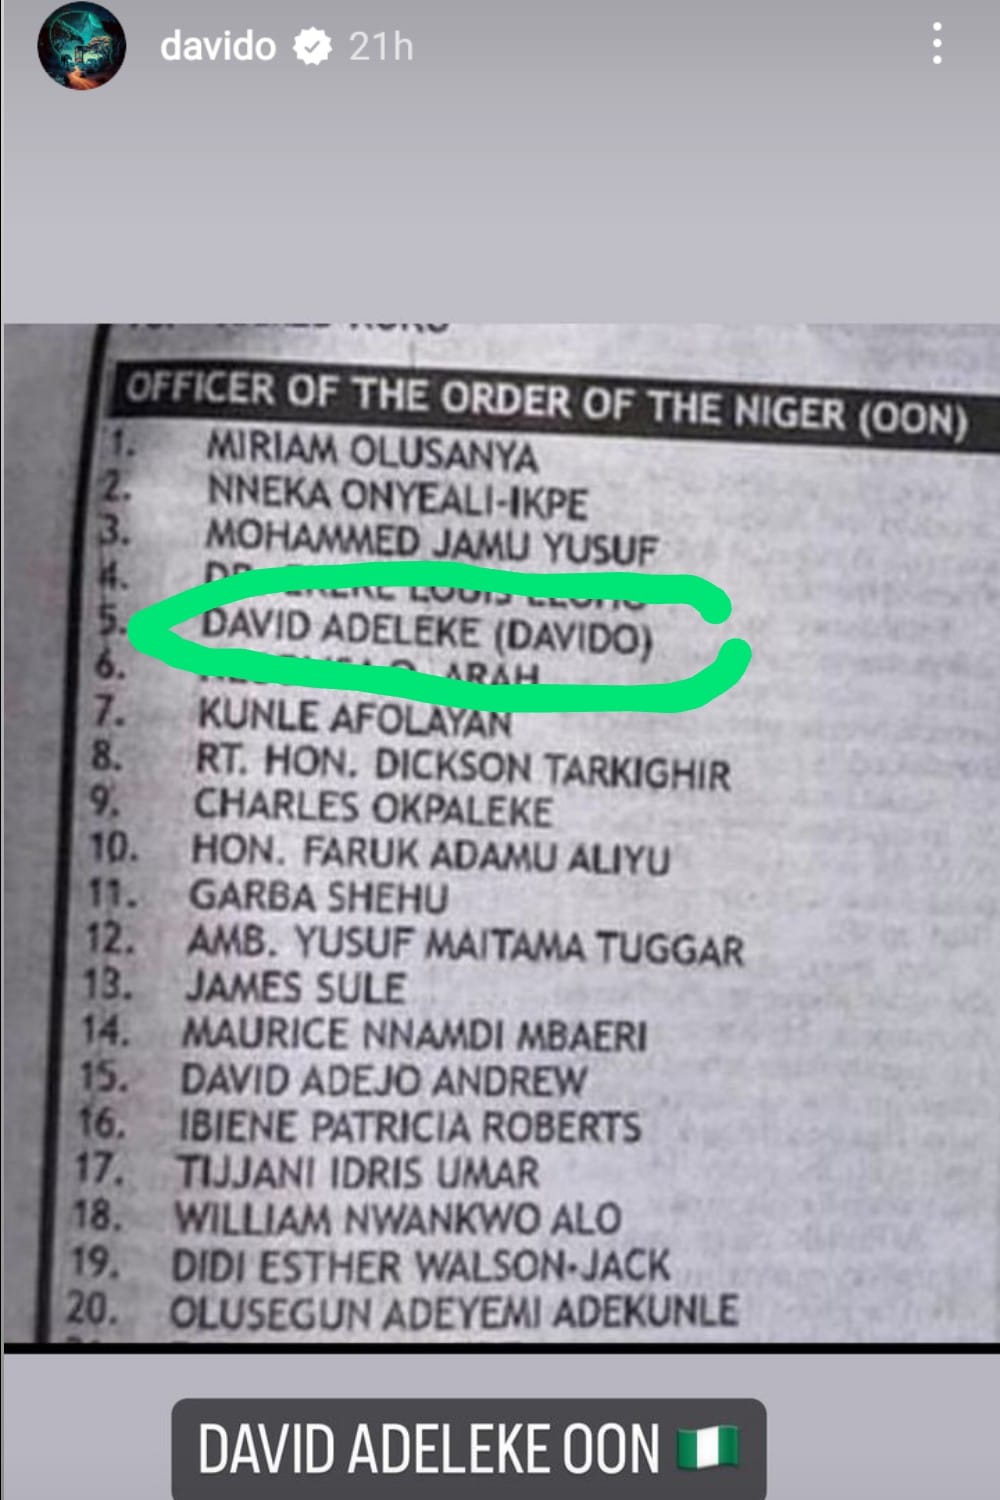 Davido accorded Officer of the Order of the Niger (OON)